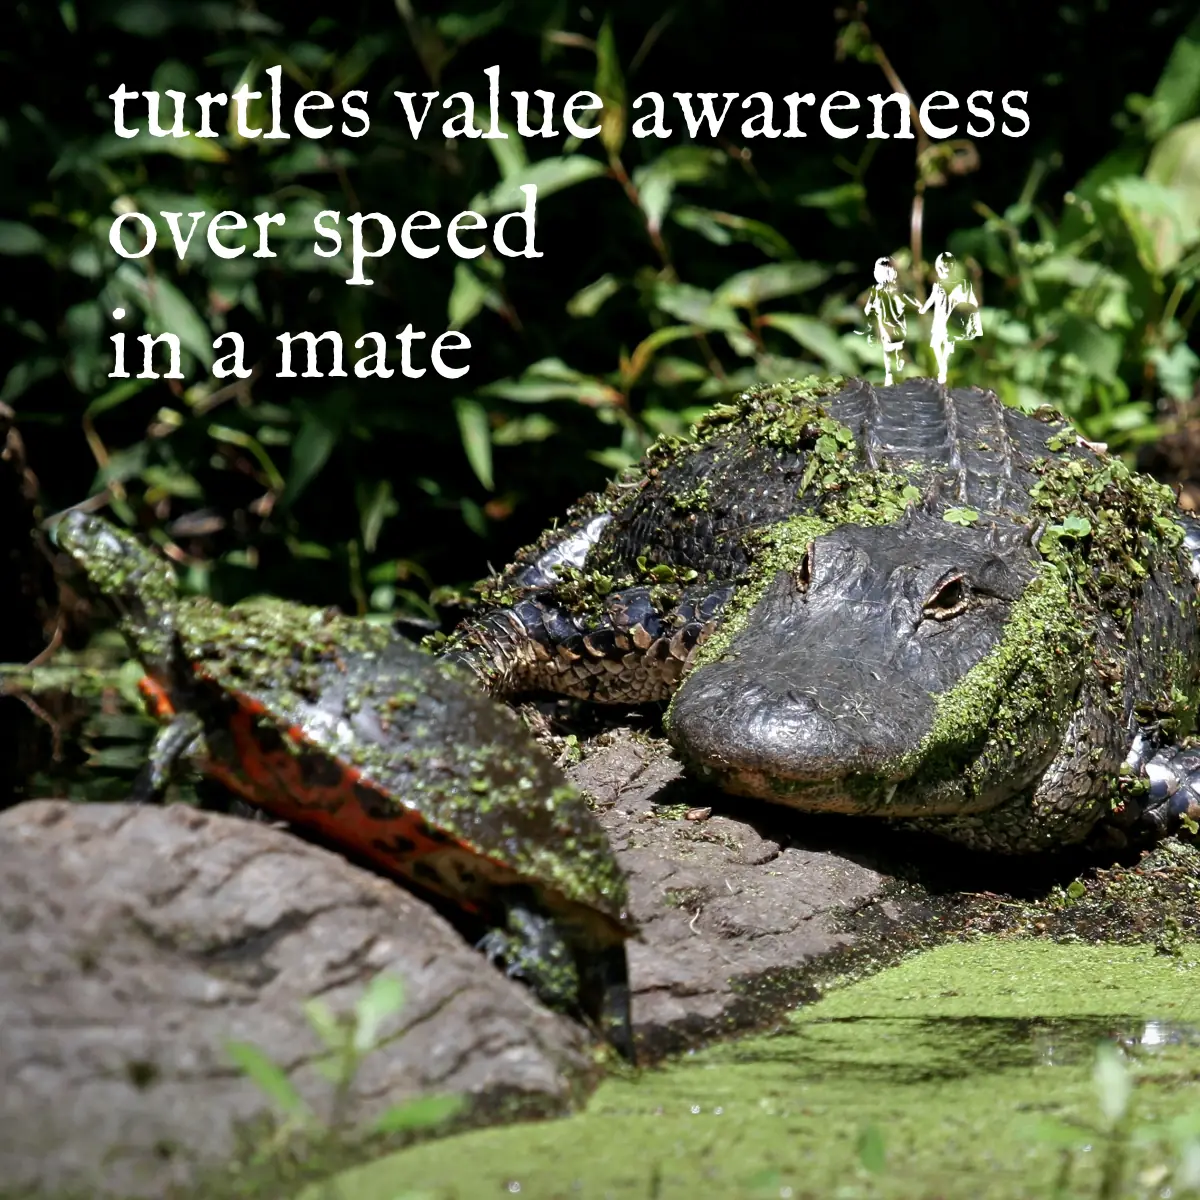 A turtle is being watched by a crocodile that is very close